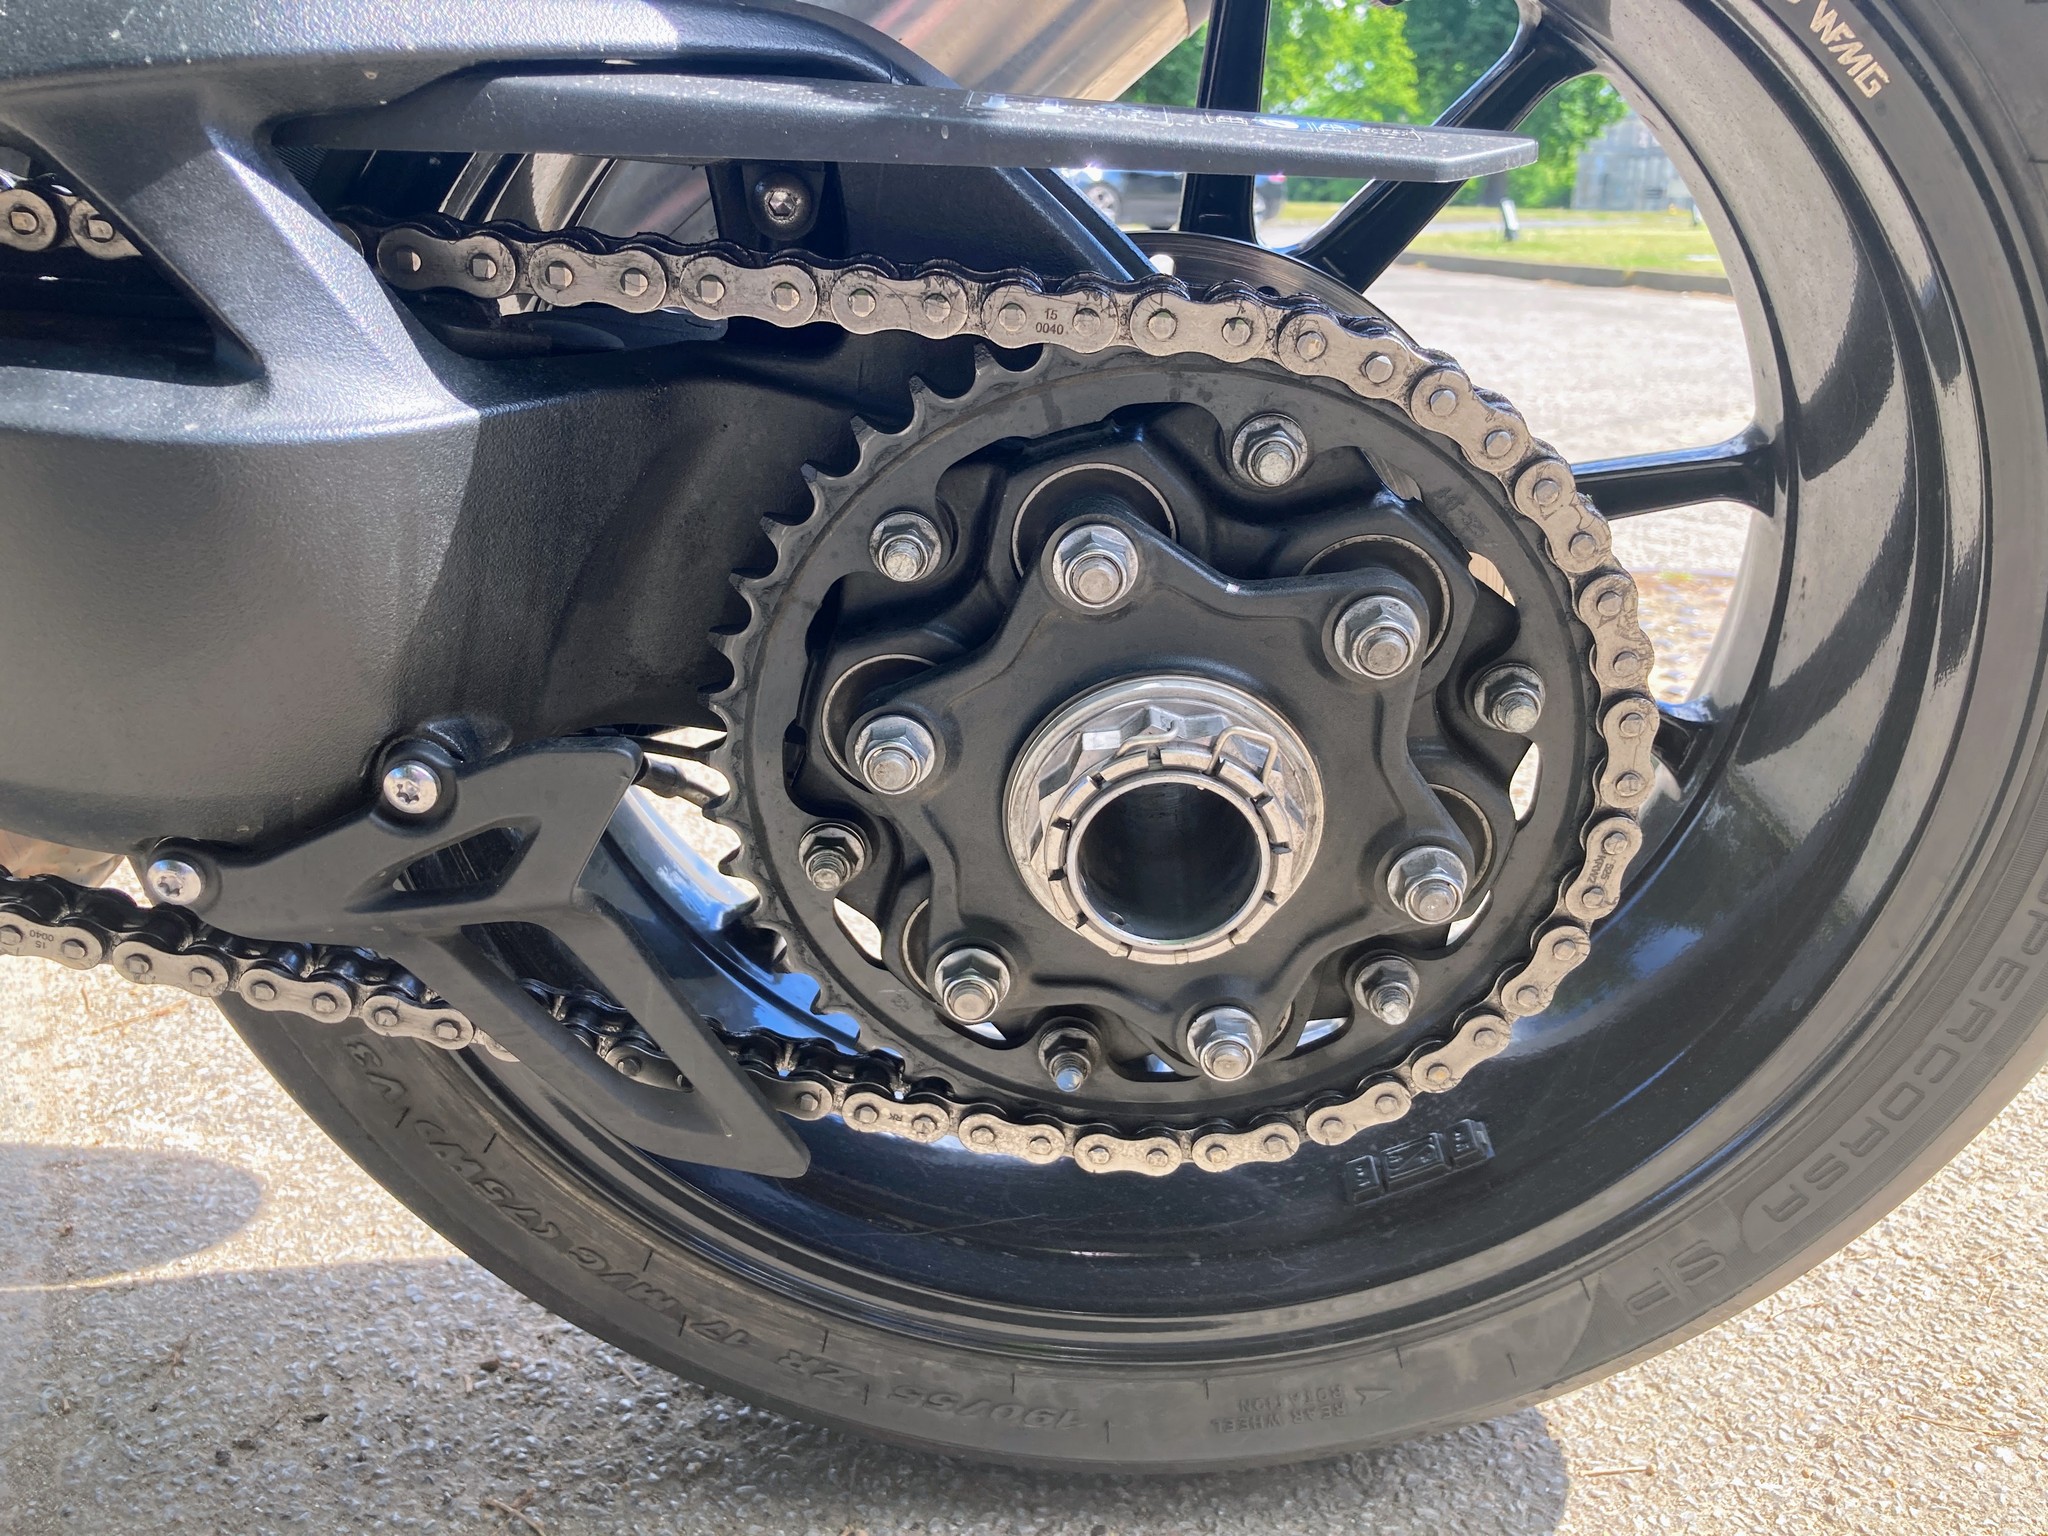 Triumph Speed Triple RR rear chain and sprocket